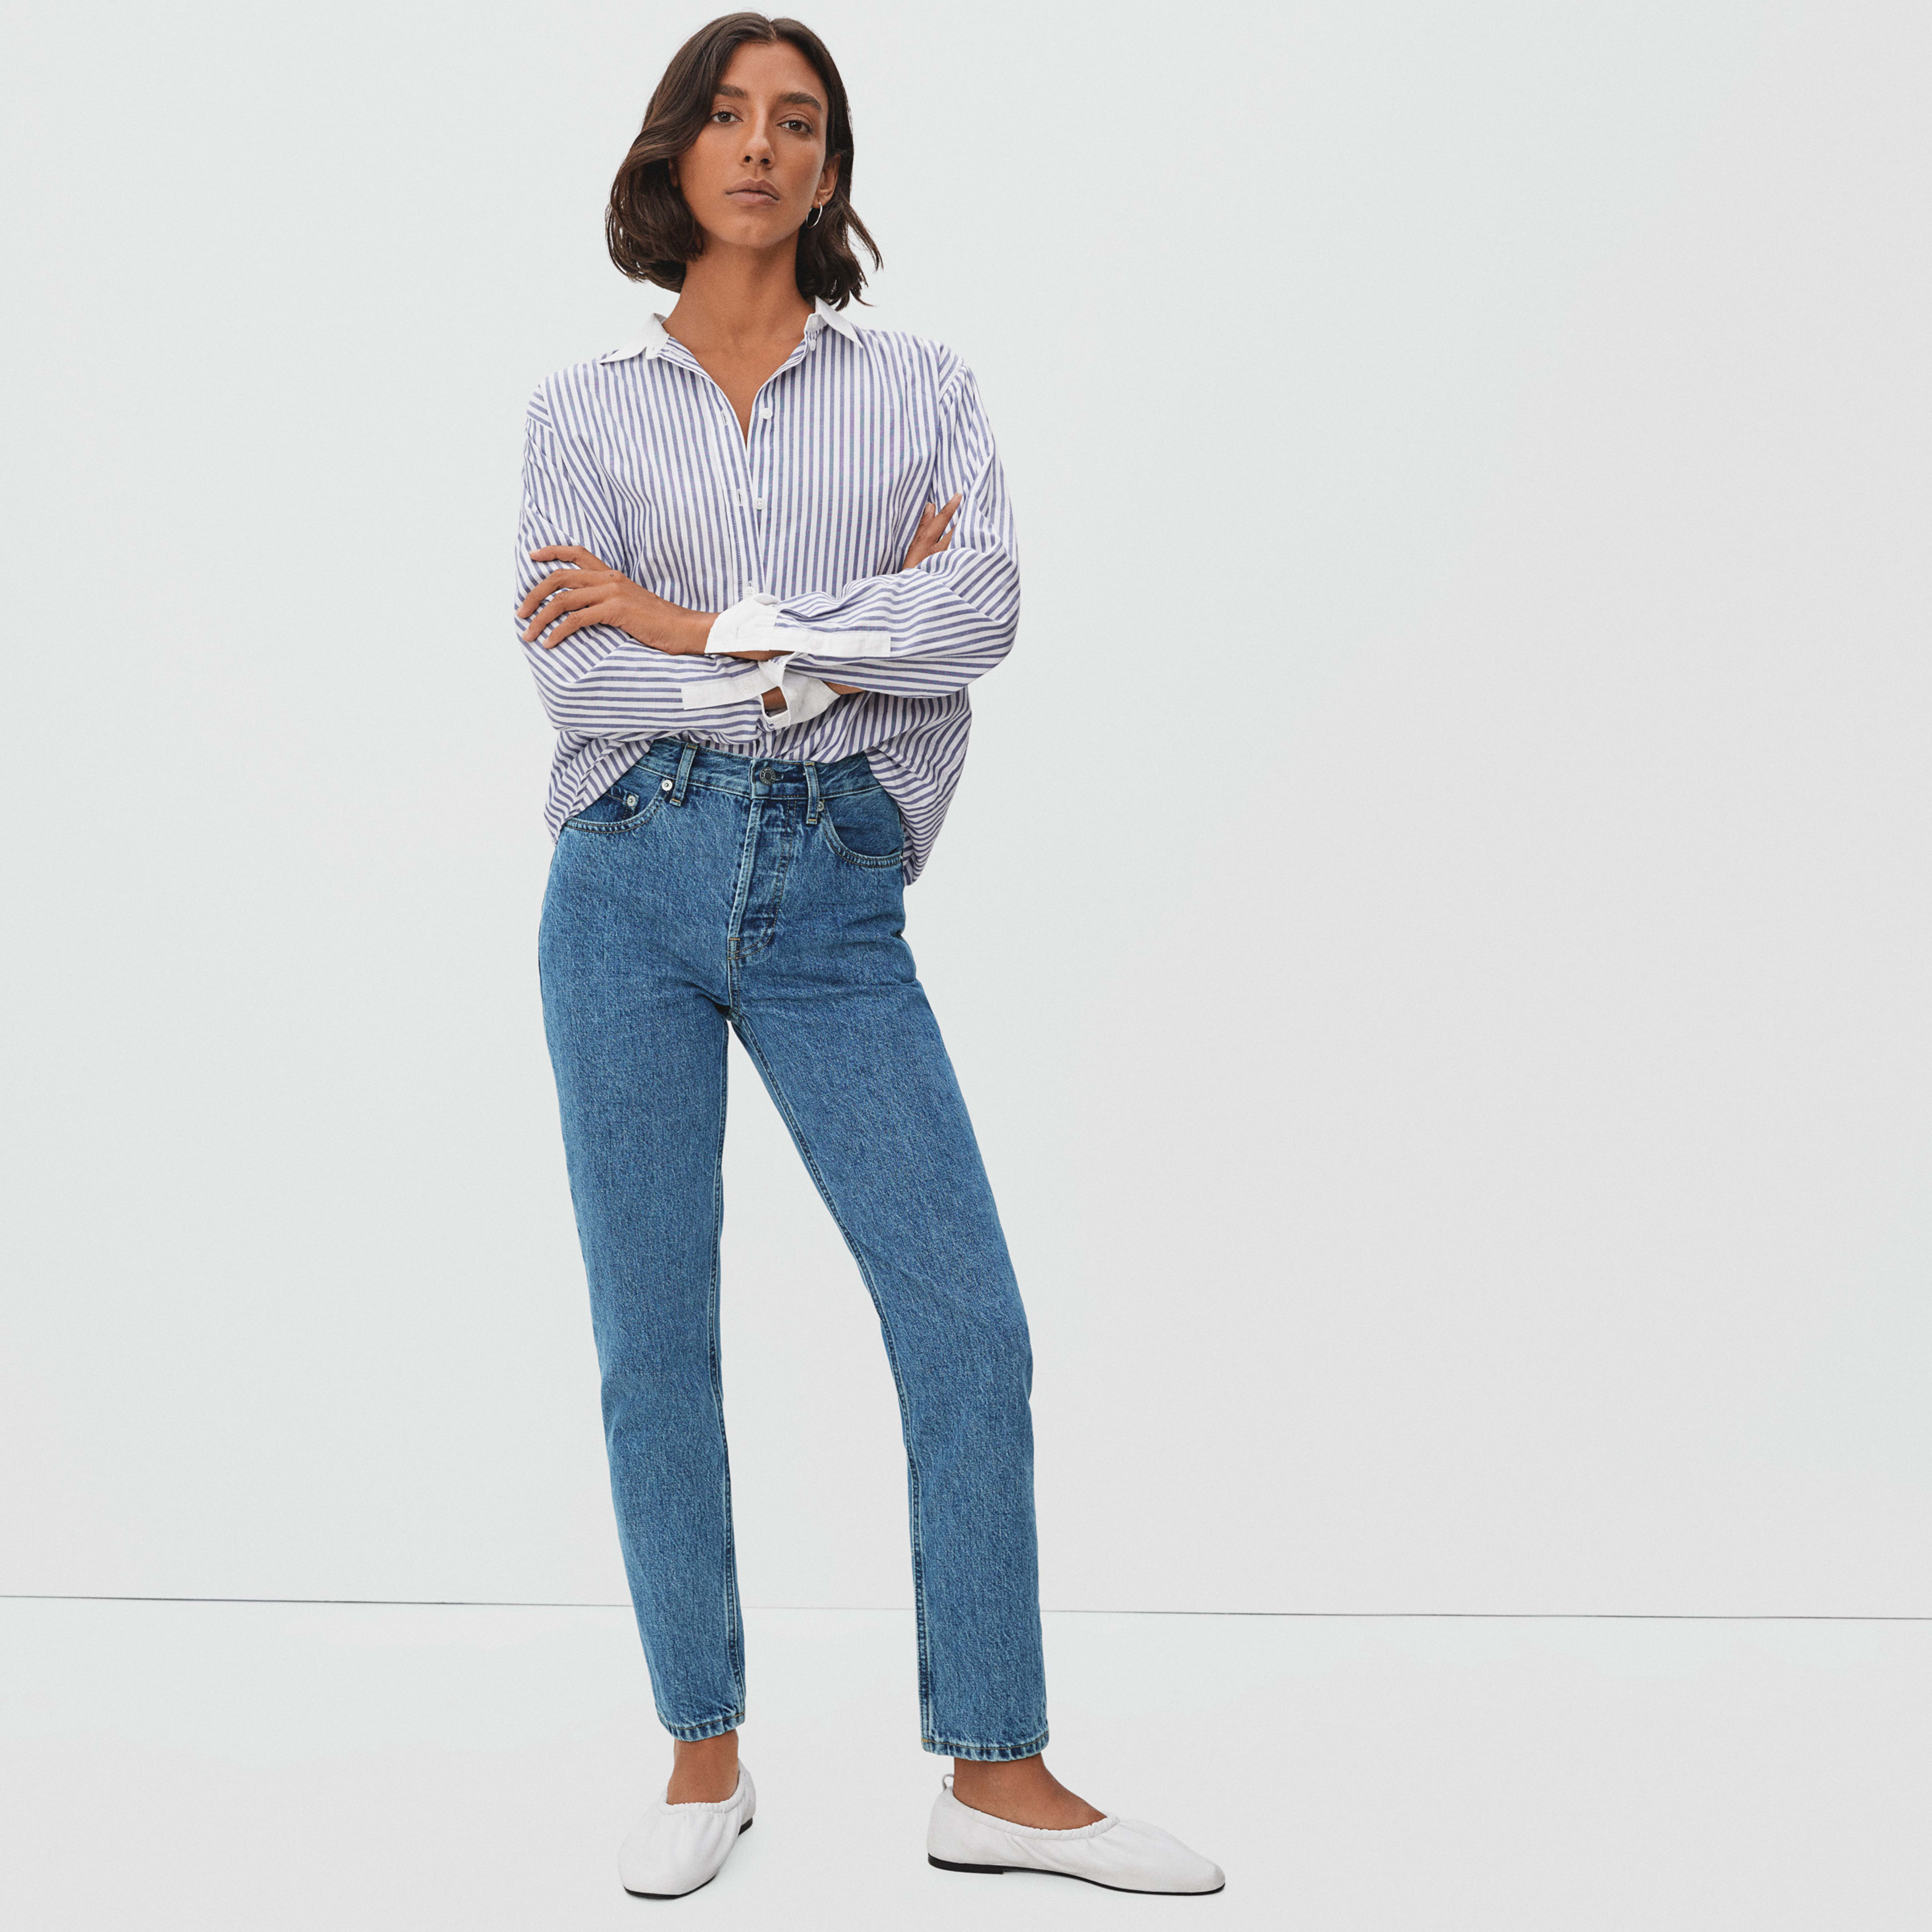 The 90's Cheeky Straight Jean - Vintage Light Blue